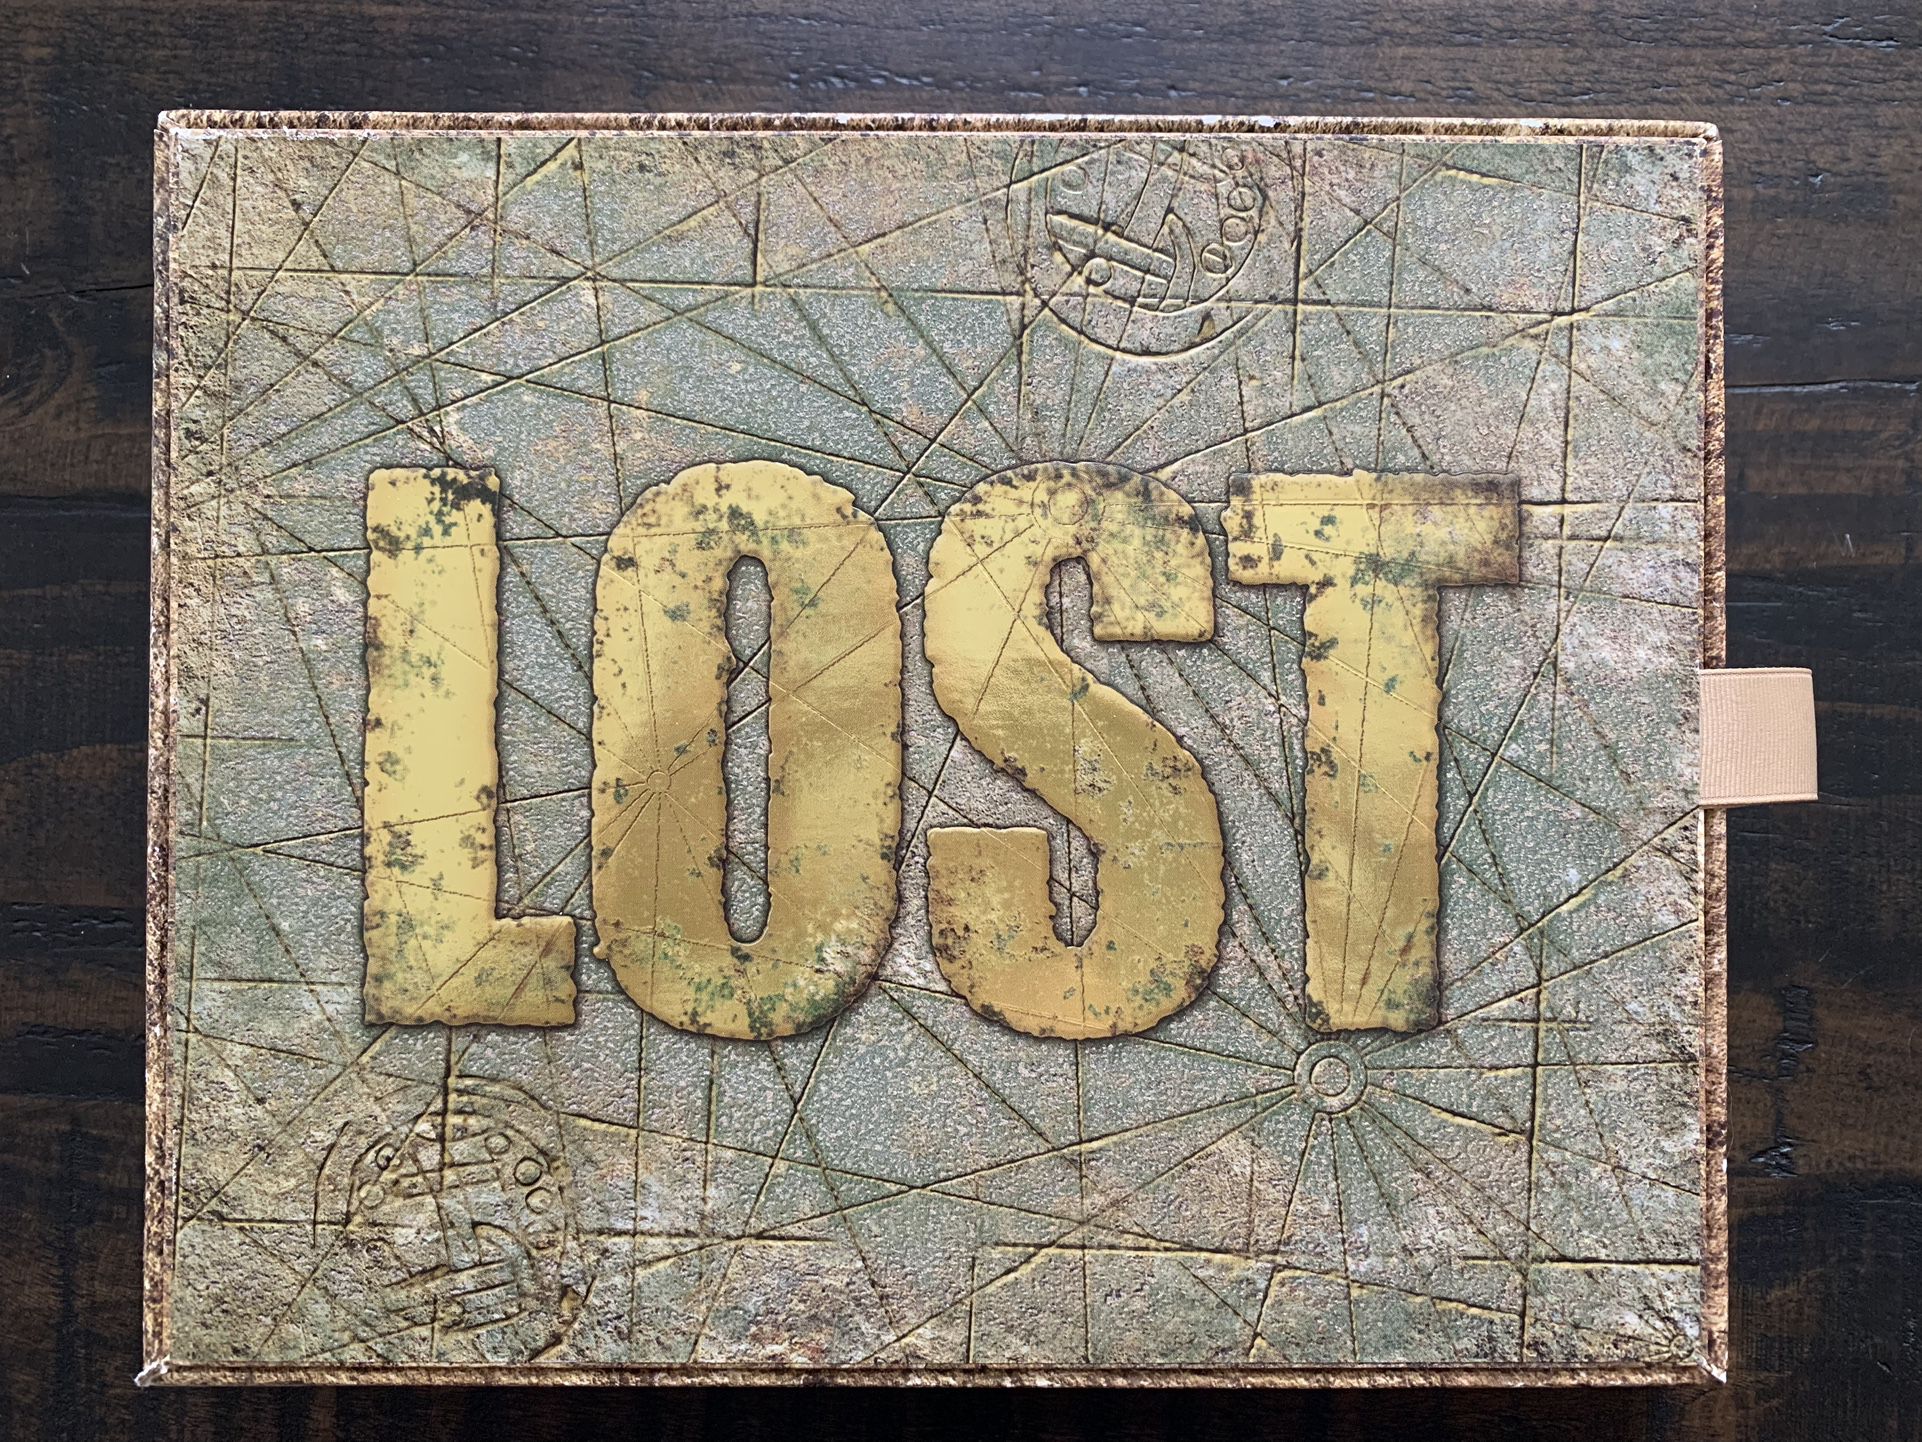 Lost: The Complete Collection Limited Edition DVD Set - Never Used!